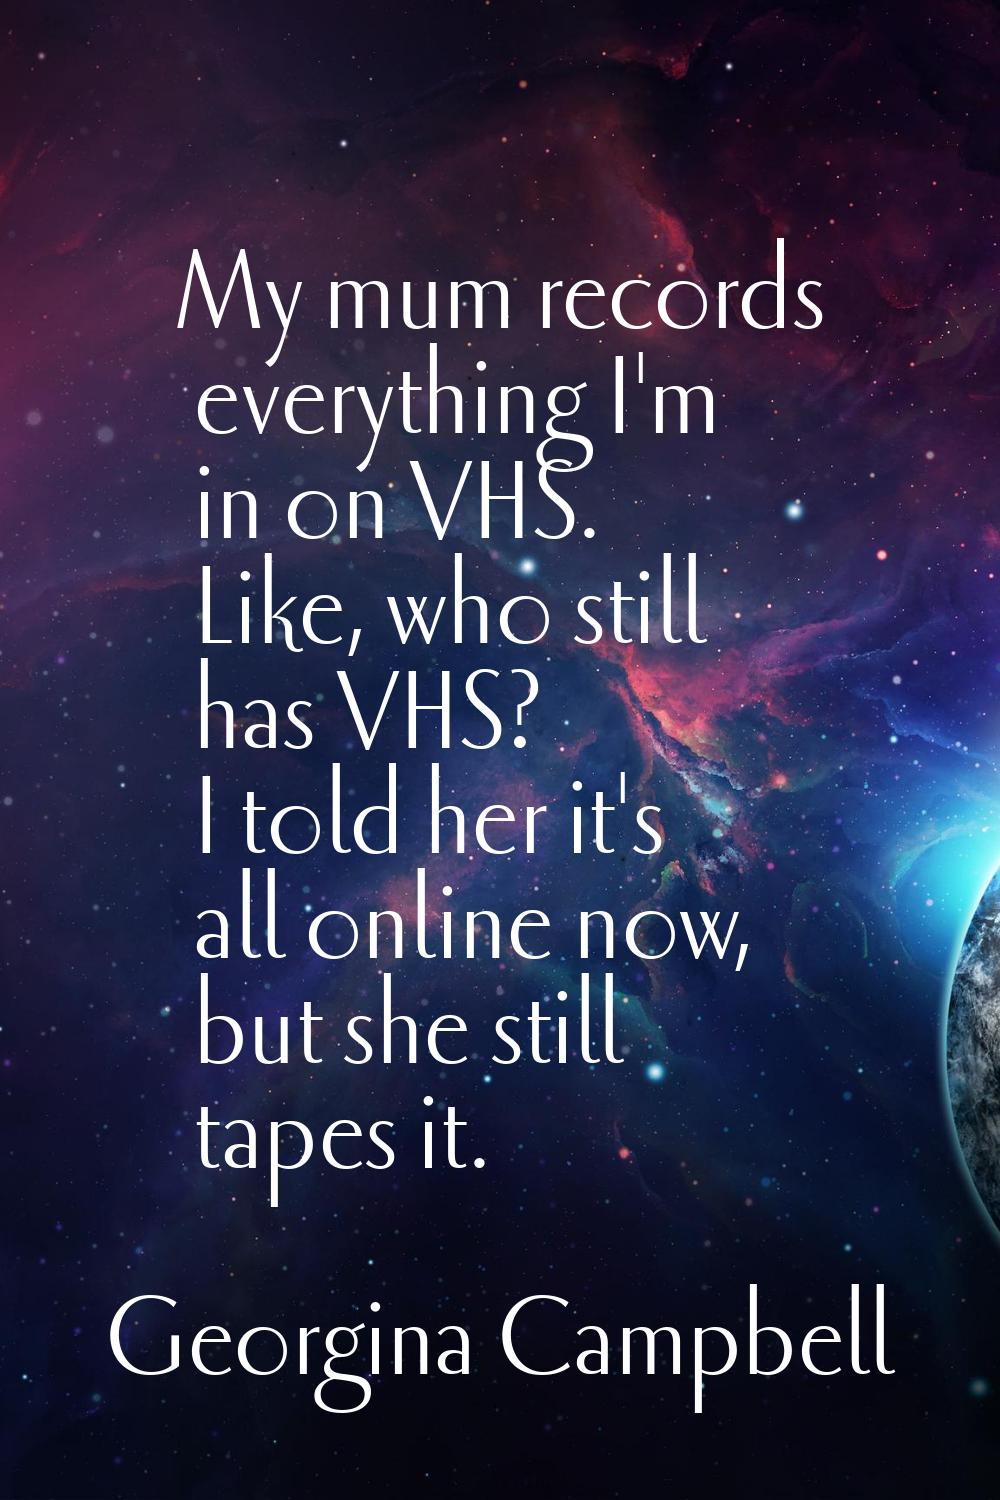 My mum records everything I'm in on VHS. Like, who still has VHS? I told her it's all online now, b